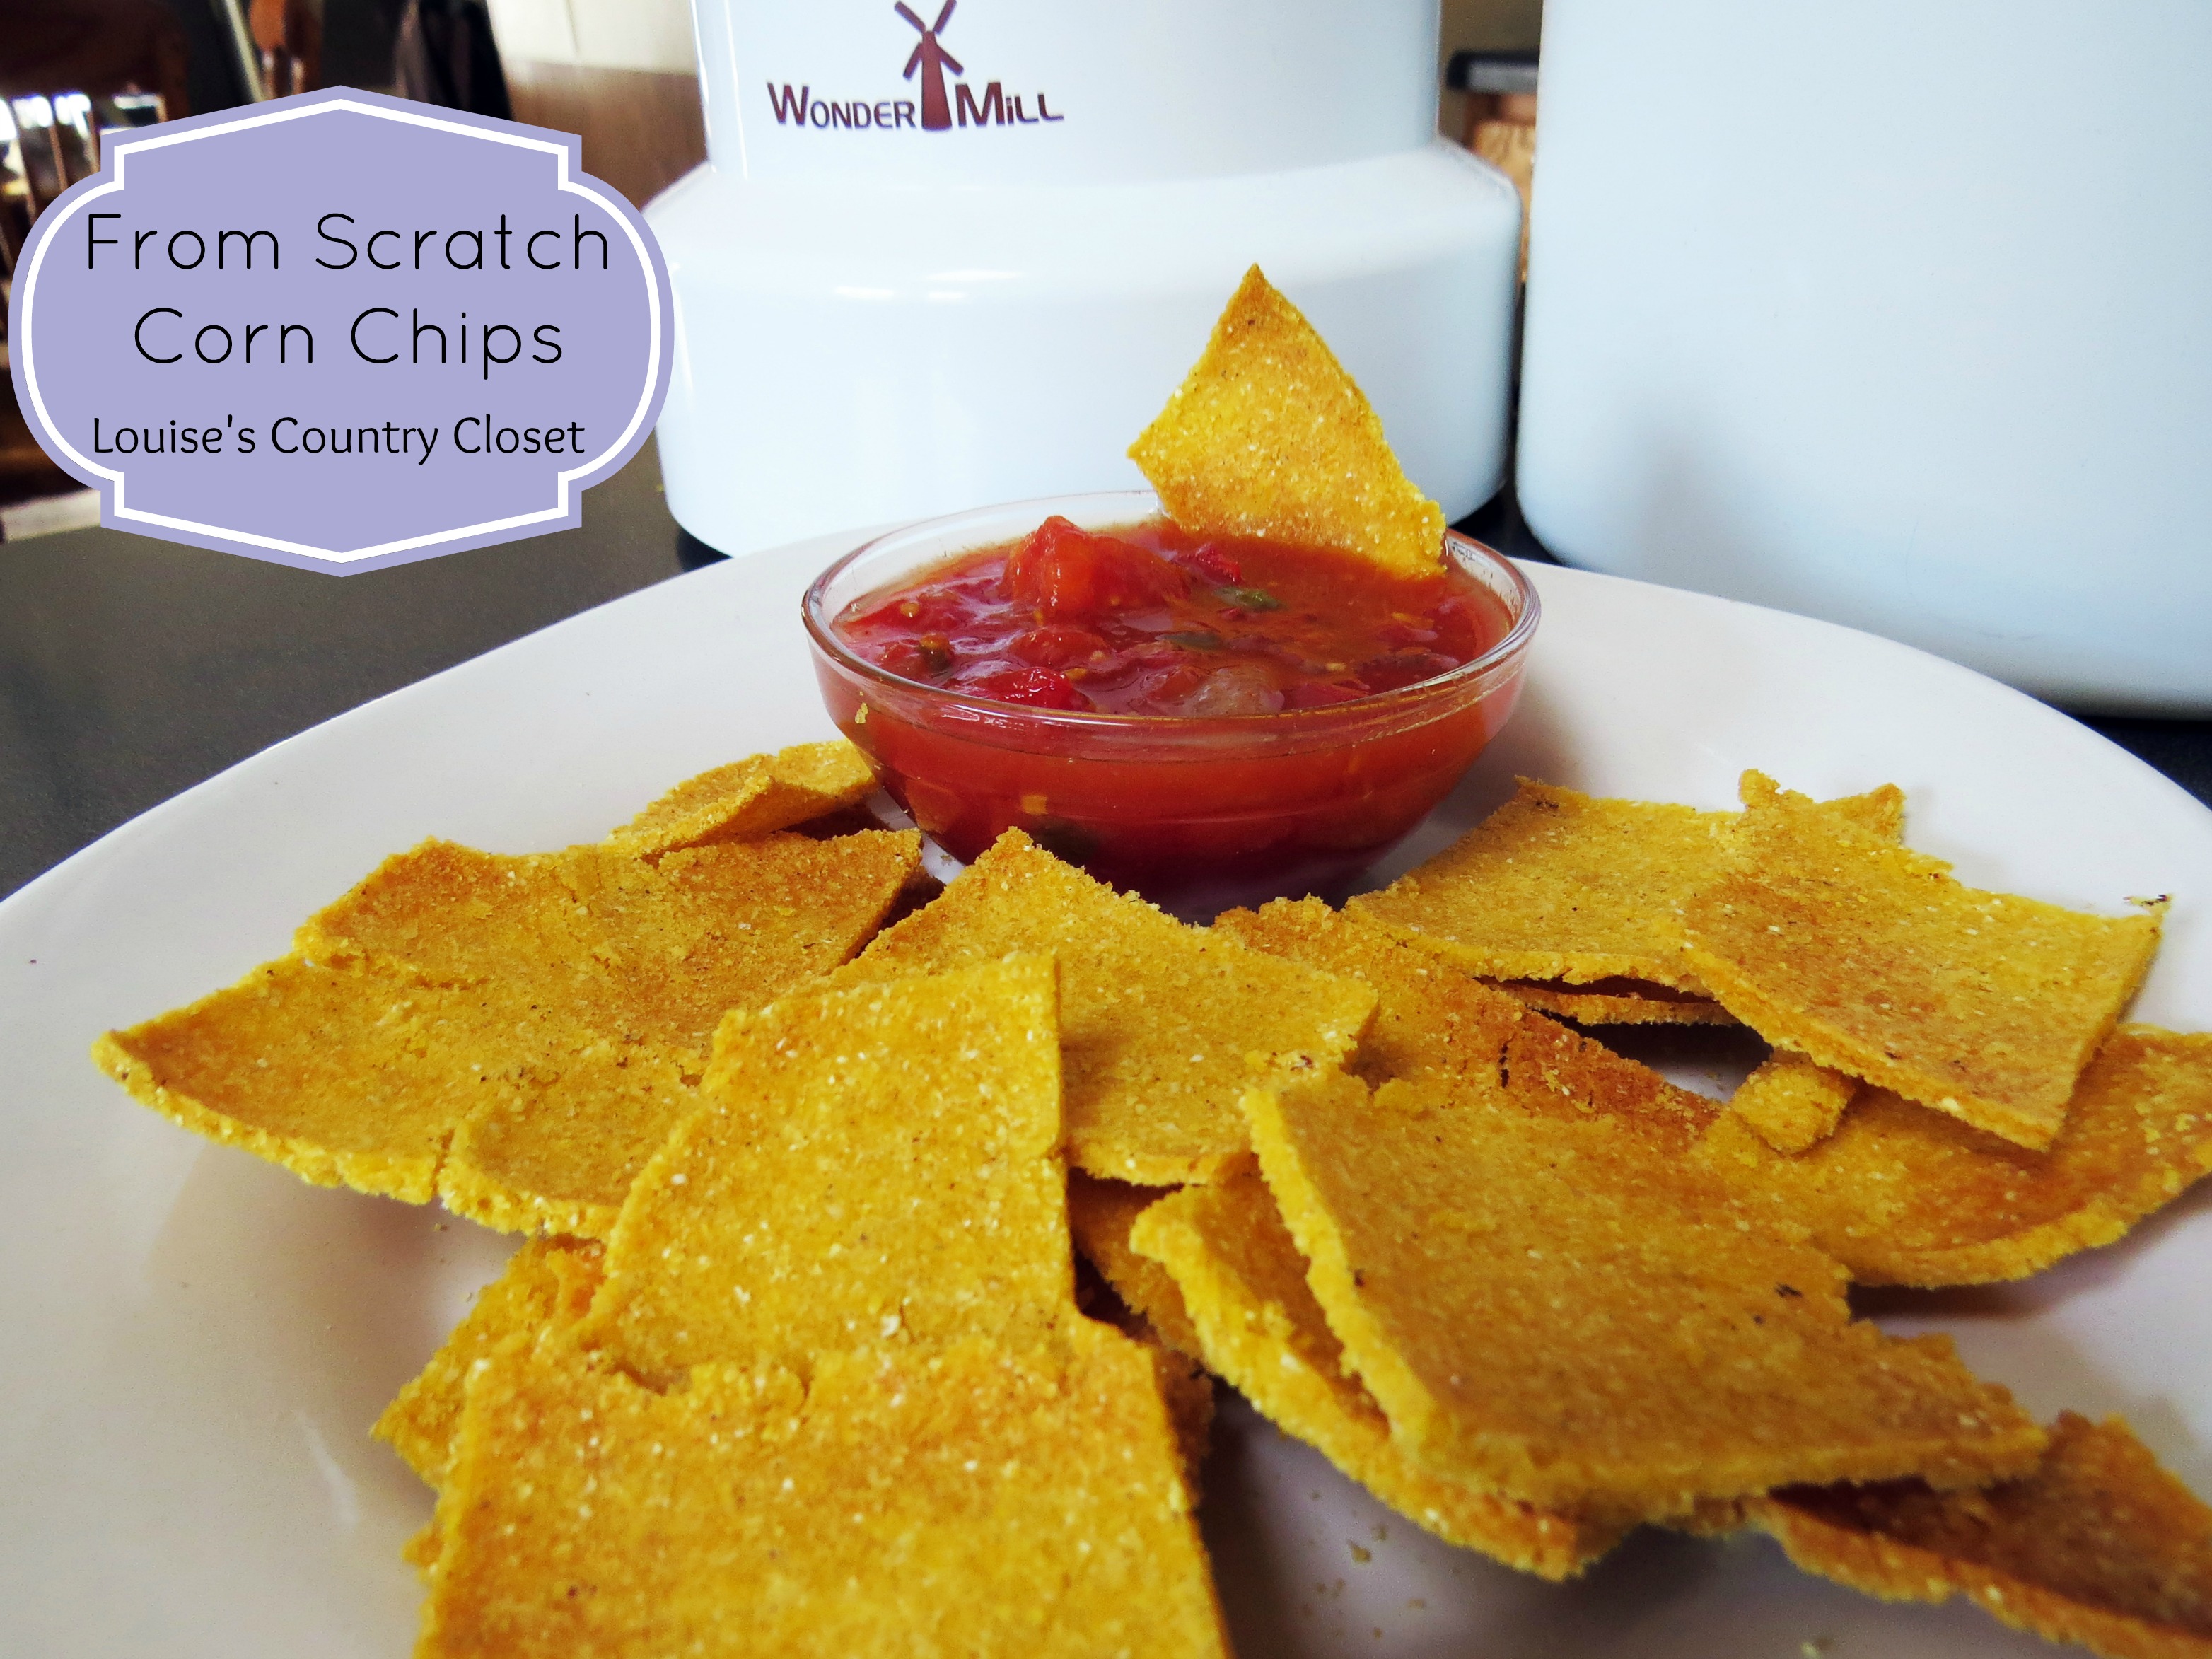 From Scratch Corn Chips